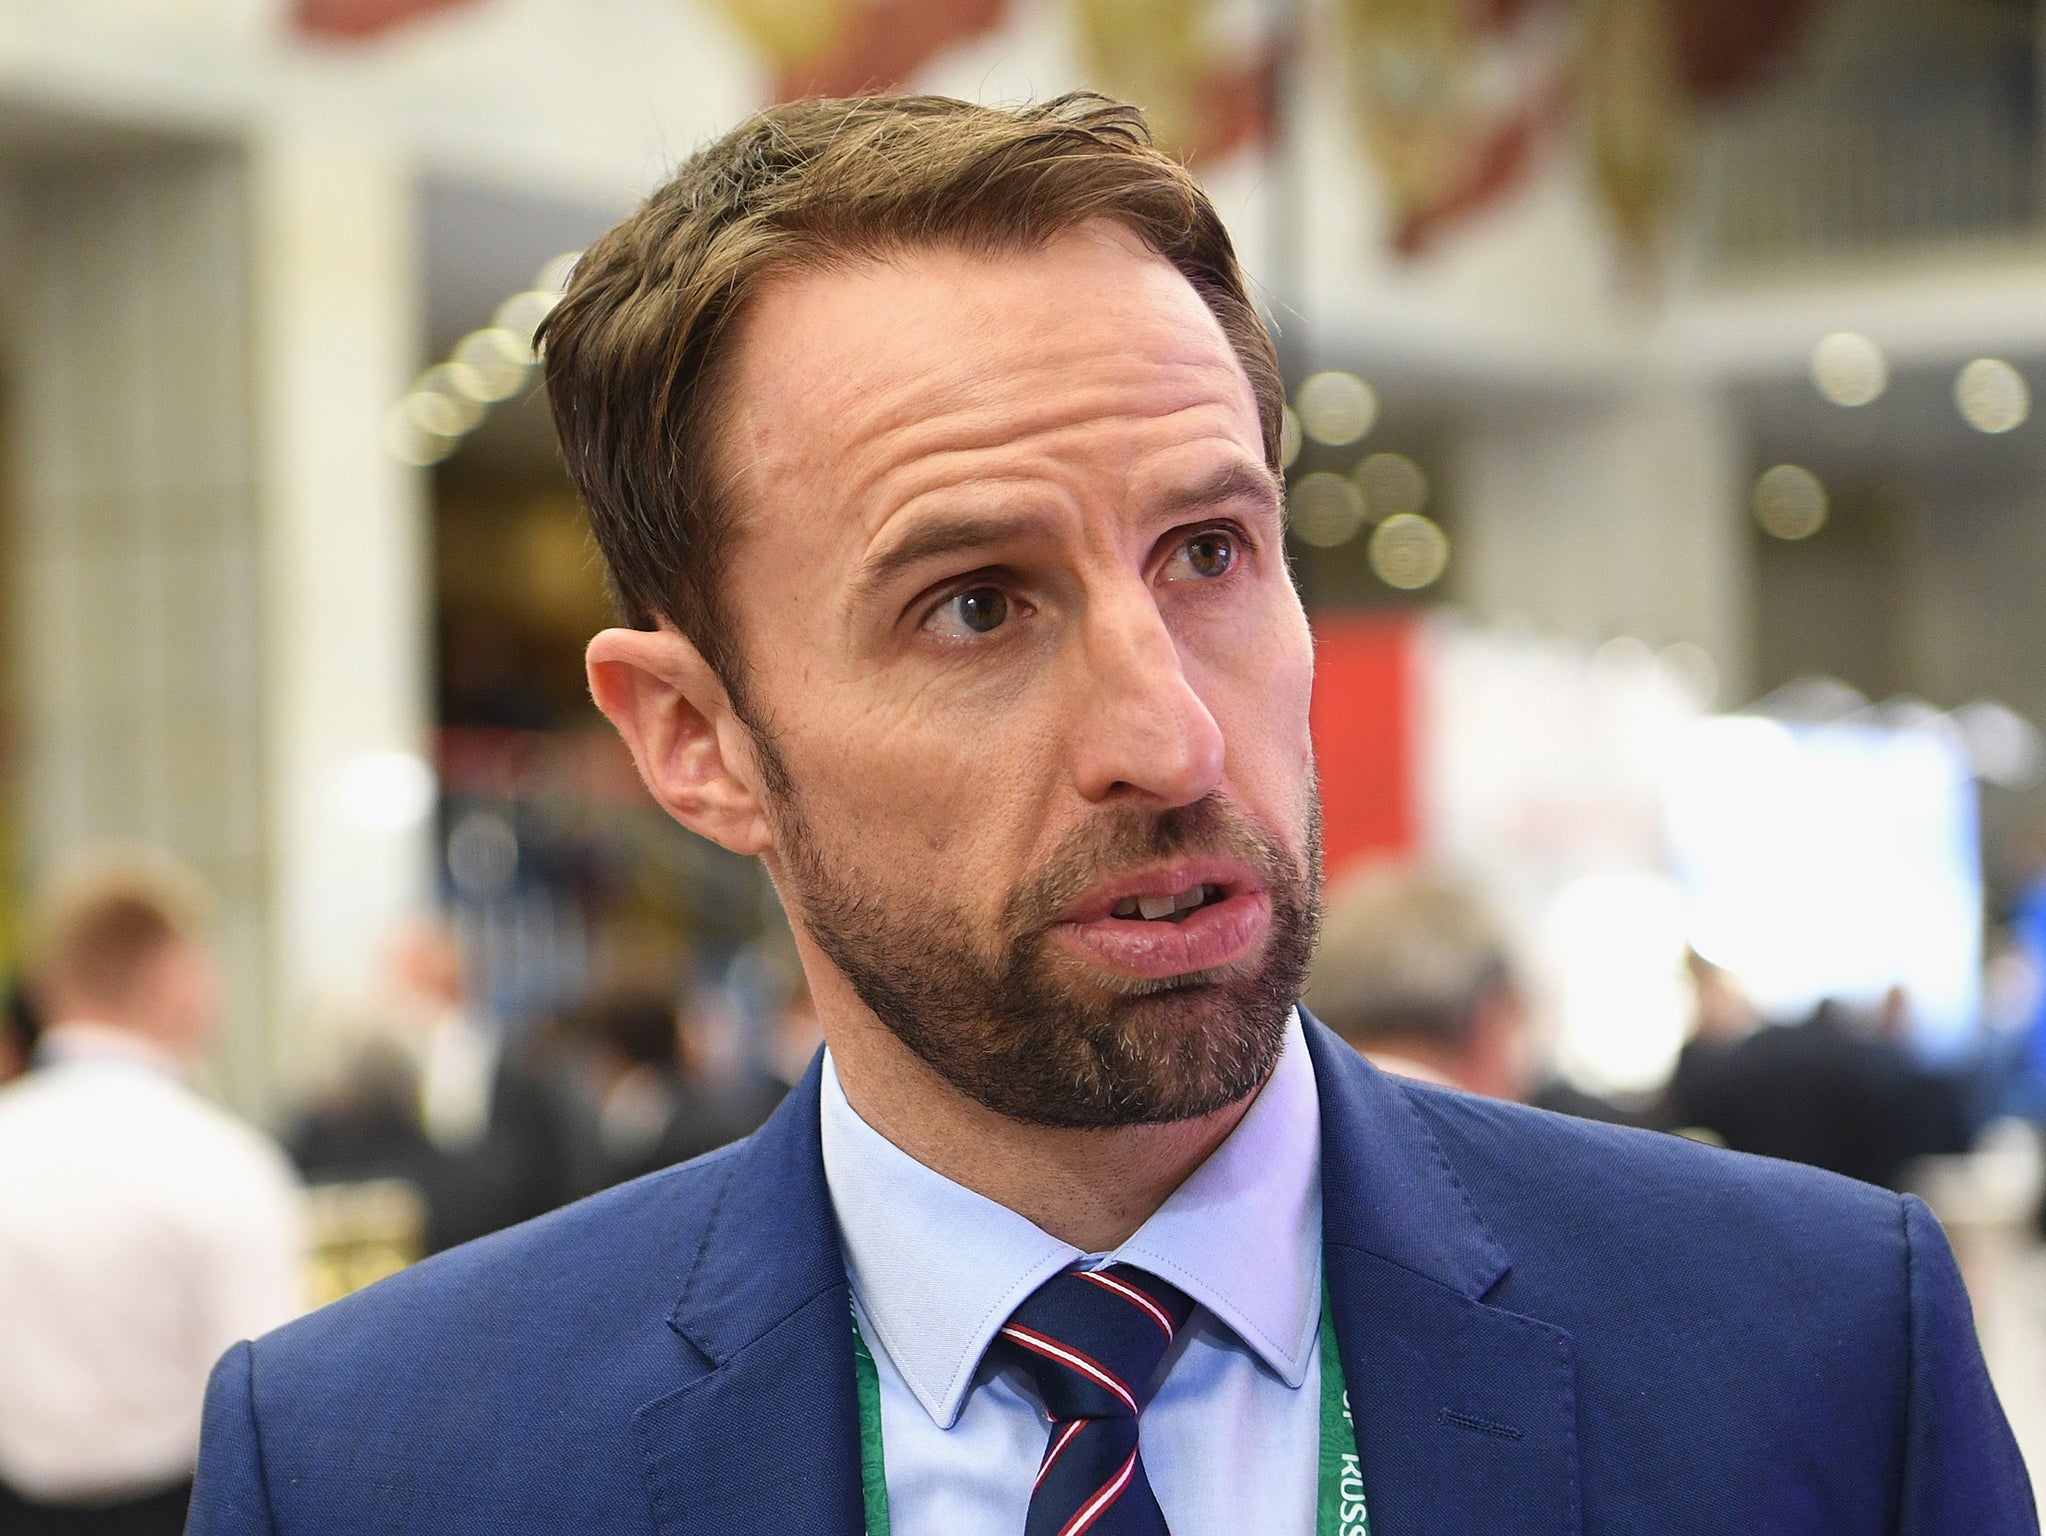 Gareth Southgate pictured at Friday's ceremonial draw in Moscow